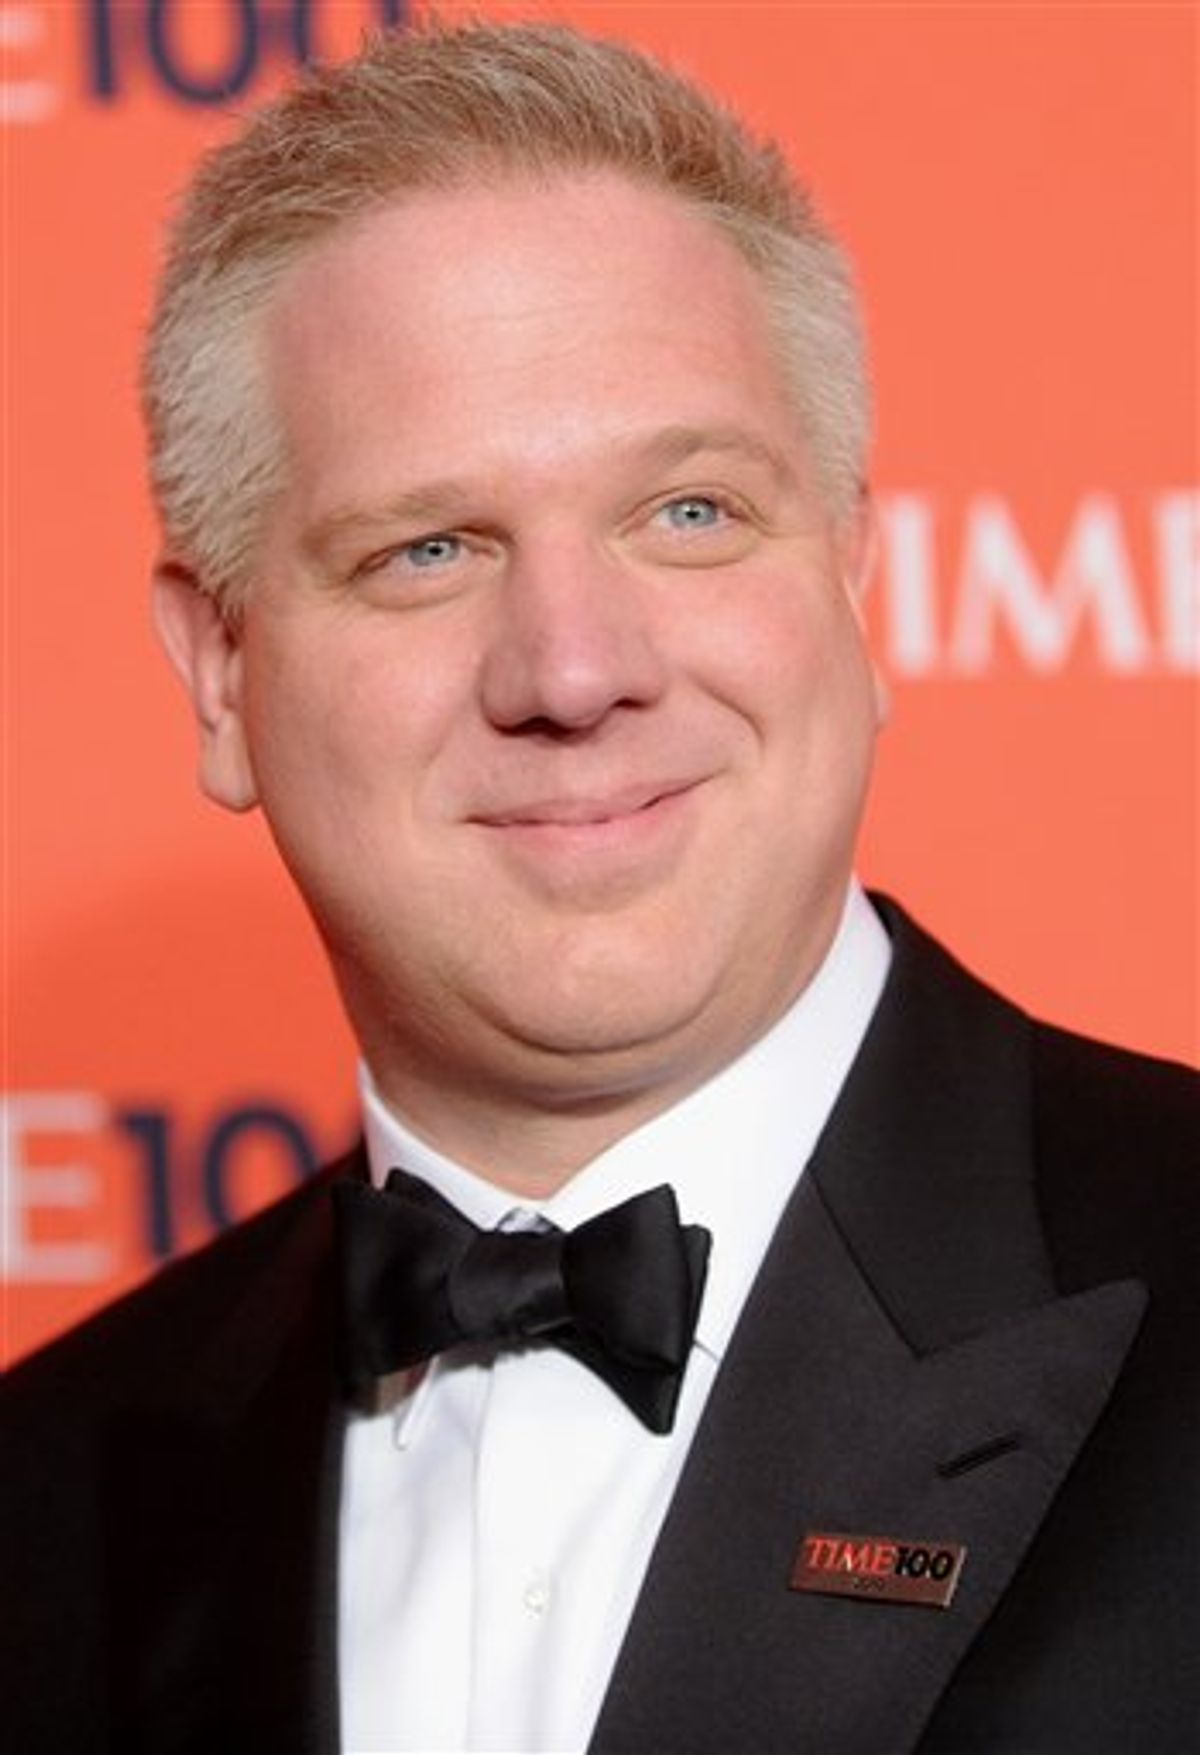 FILE - In this May 4, 2010 file photo, Fox News Channel's Glenn Beck attends the TIME 100 gala celebrating the 100 most influential people, at the Time Warner Center in New York. (AP Photo/Evan Agostini, file) (AP)